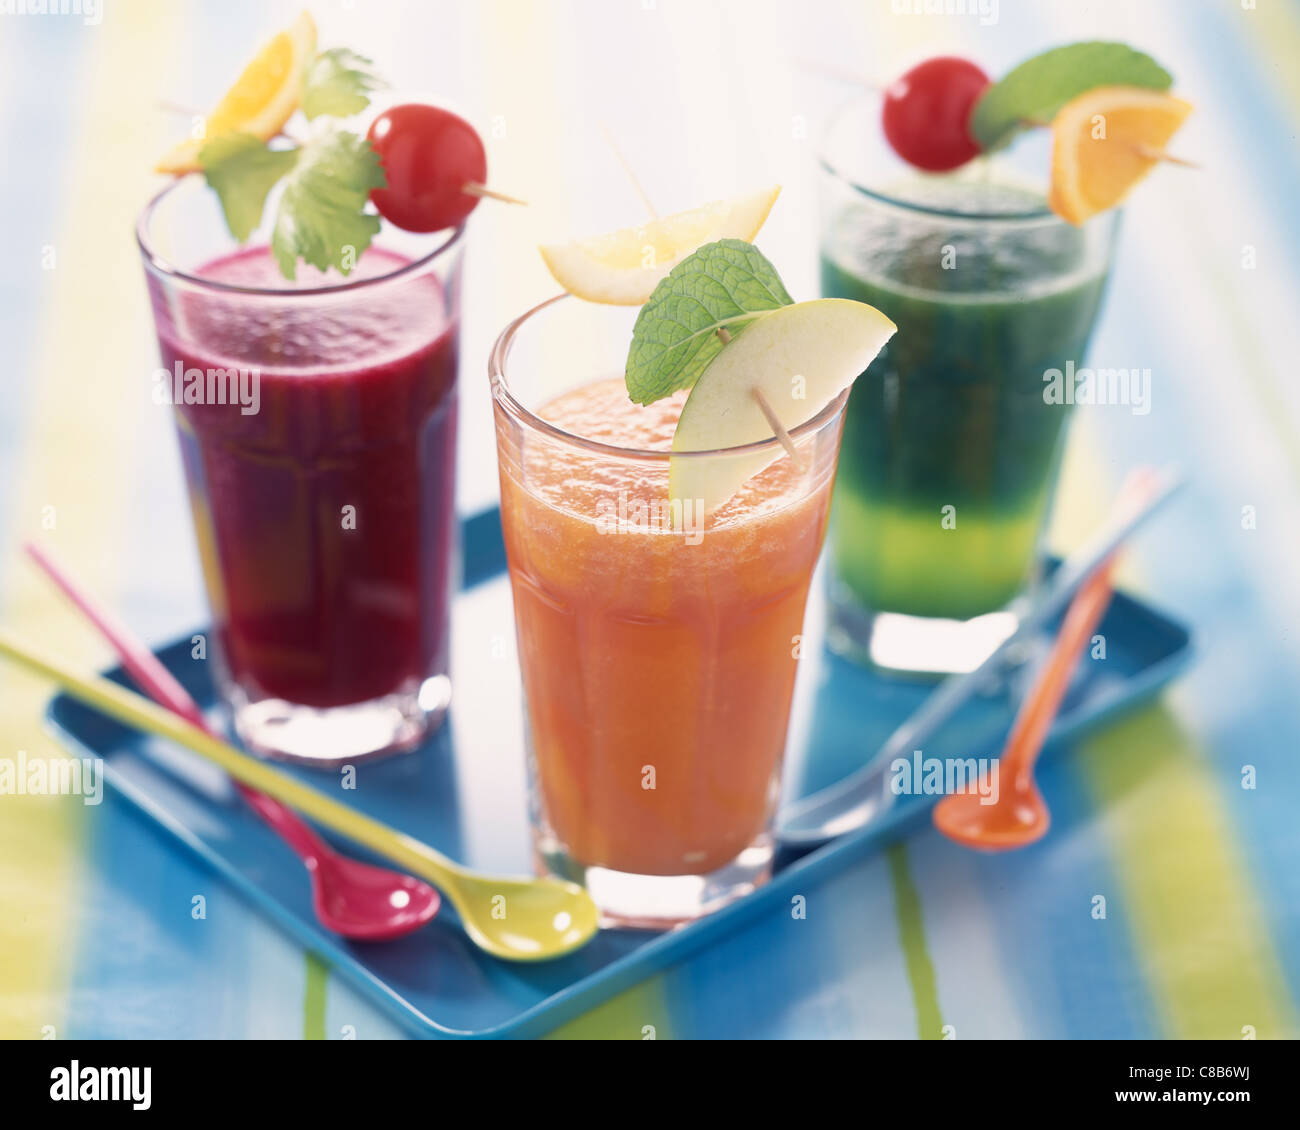 Glasses of fruit and vegetable smoothies Stock Photo